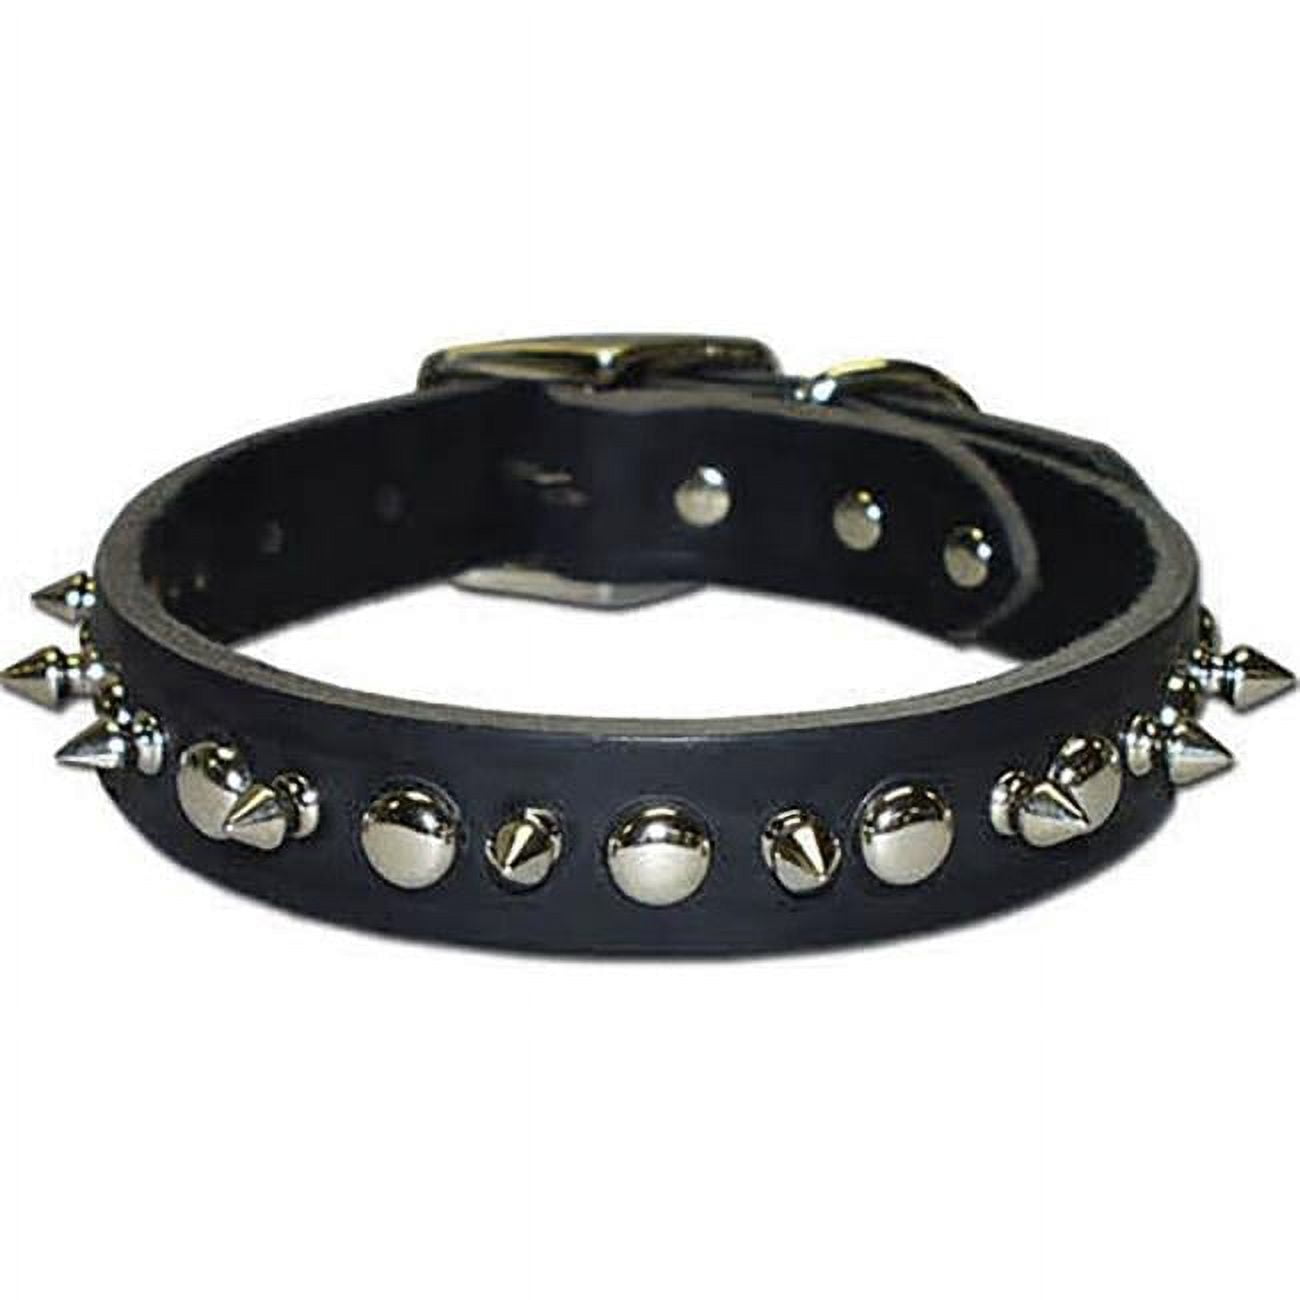 Picture of Leather Brothers 12LKS-BK12 0.5 x 12 in. Latigo Leather 1 Ply Spiked Dog Collar, Black